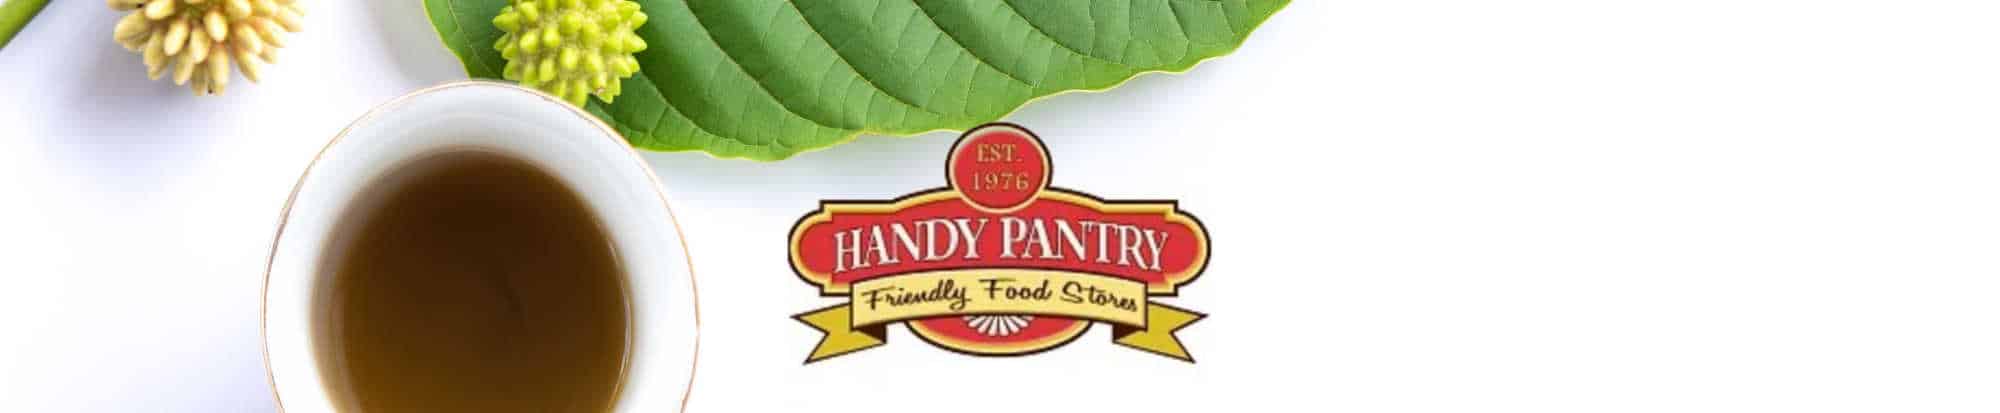 image of handy pantry